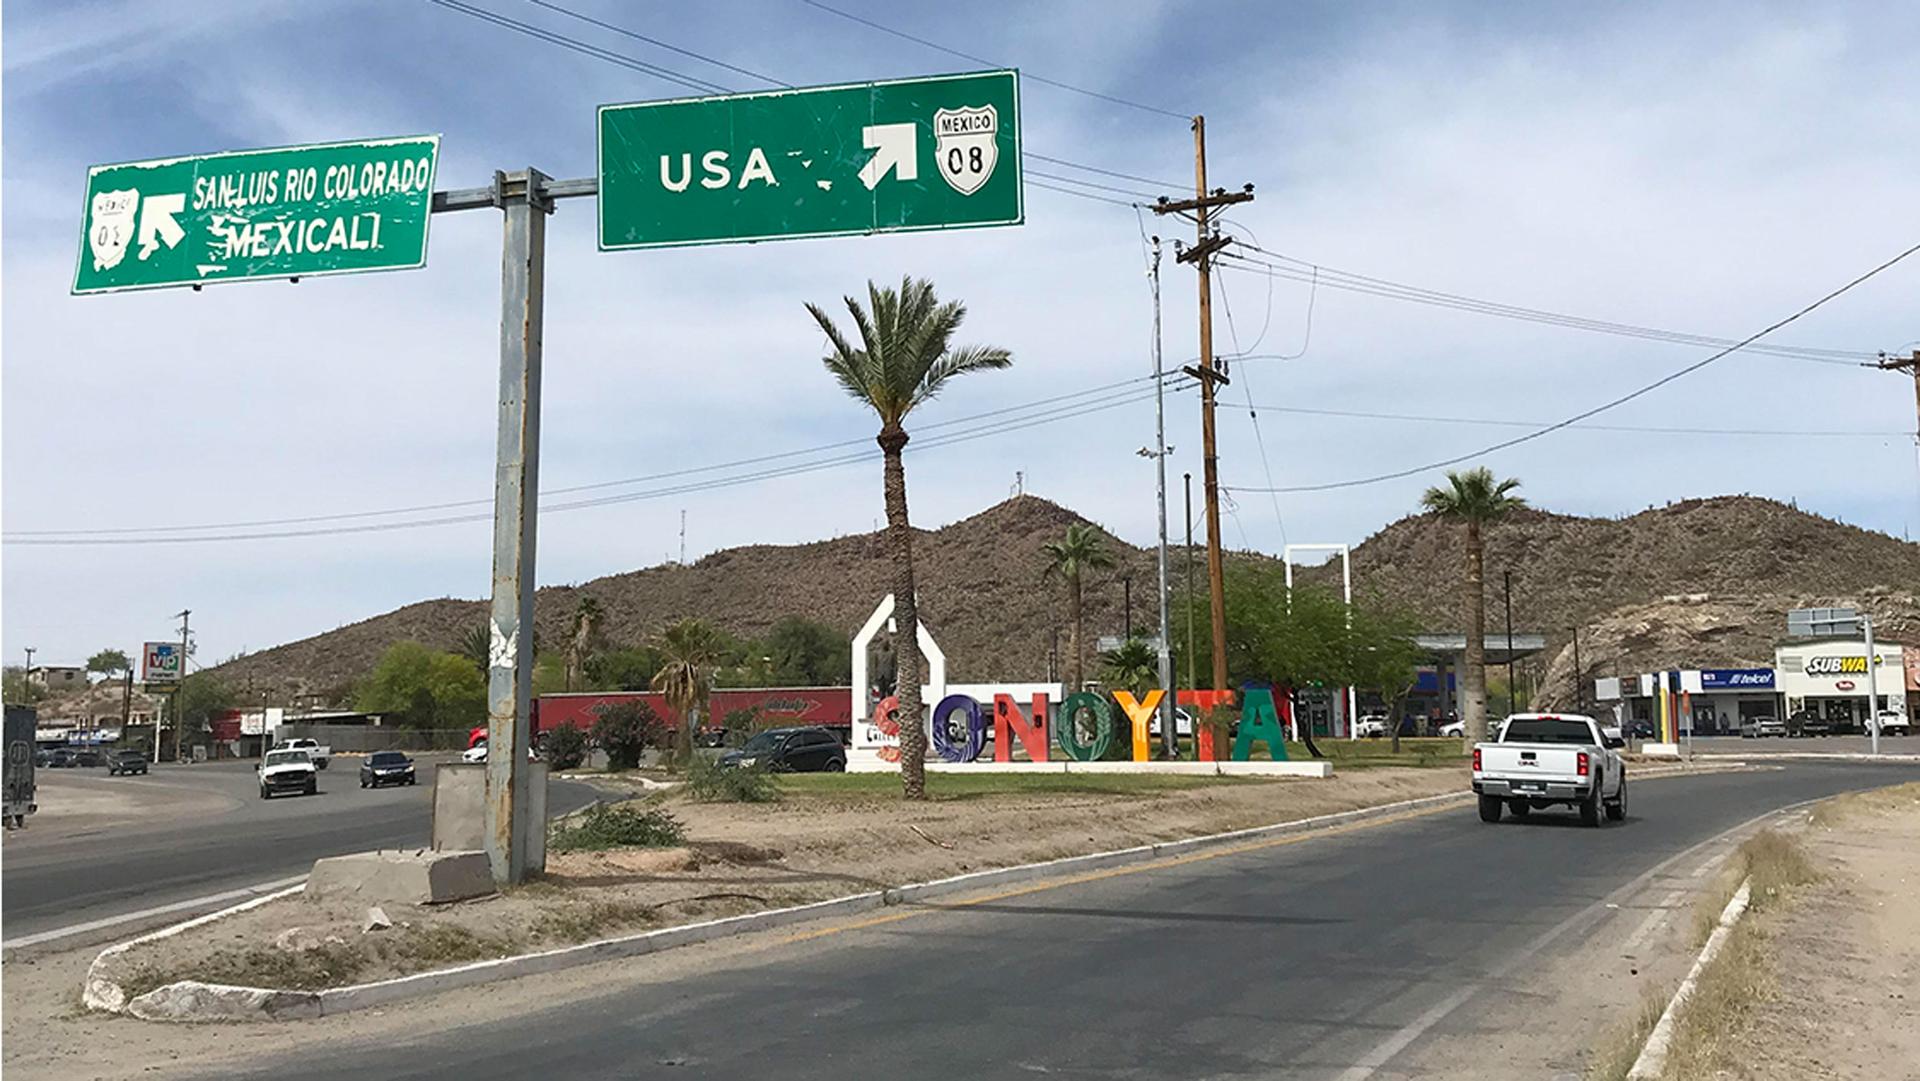 Street shot showing sign pointing to the USA, with a white truck driving down road, and colorful letters spelling Sonoyta, against backdrop of hills.